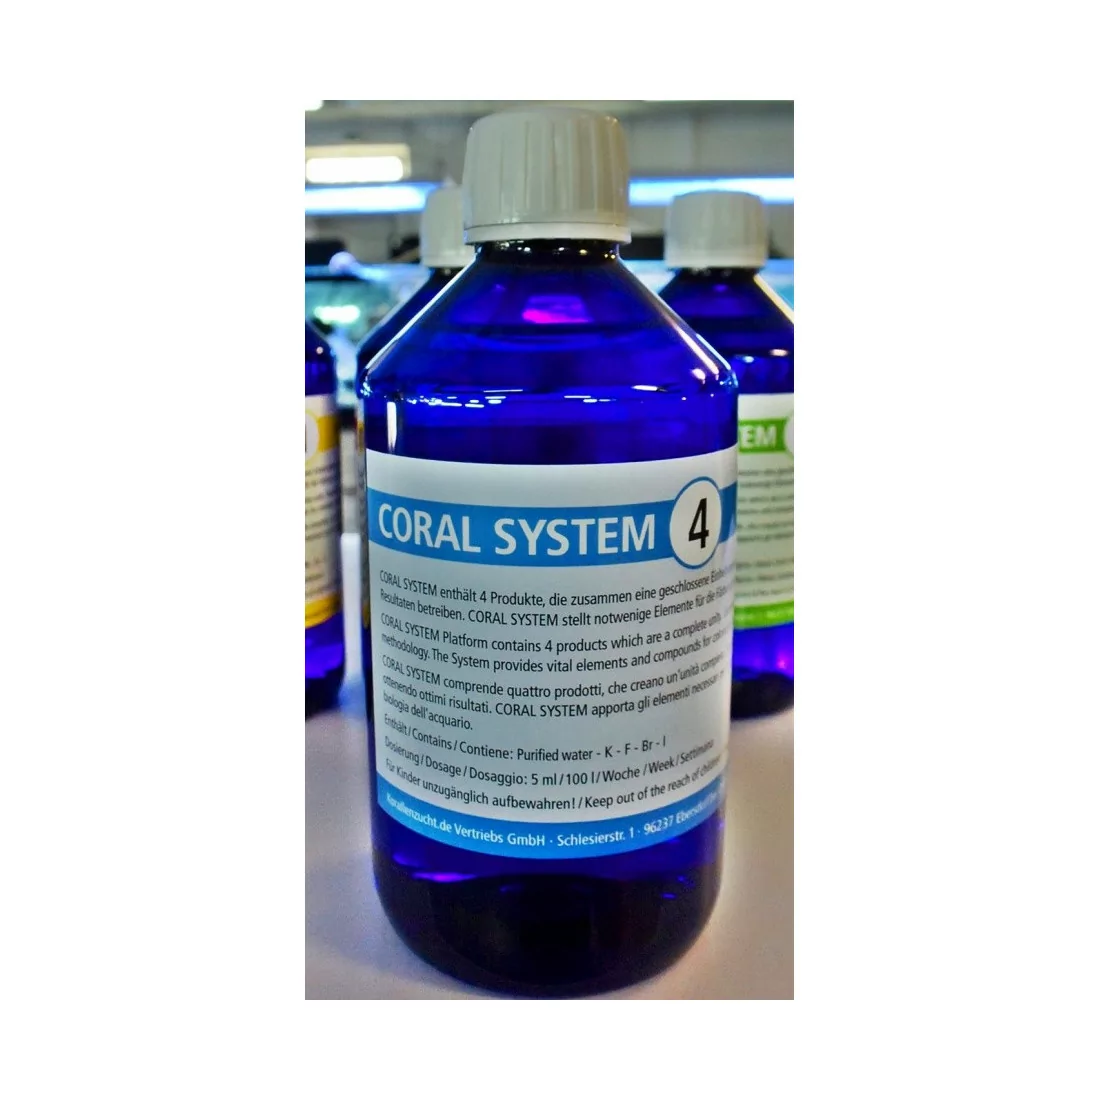 Coral system 4 - 250ml